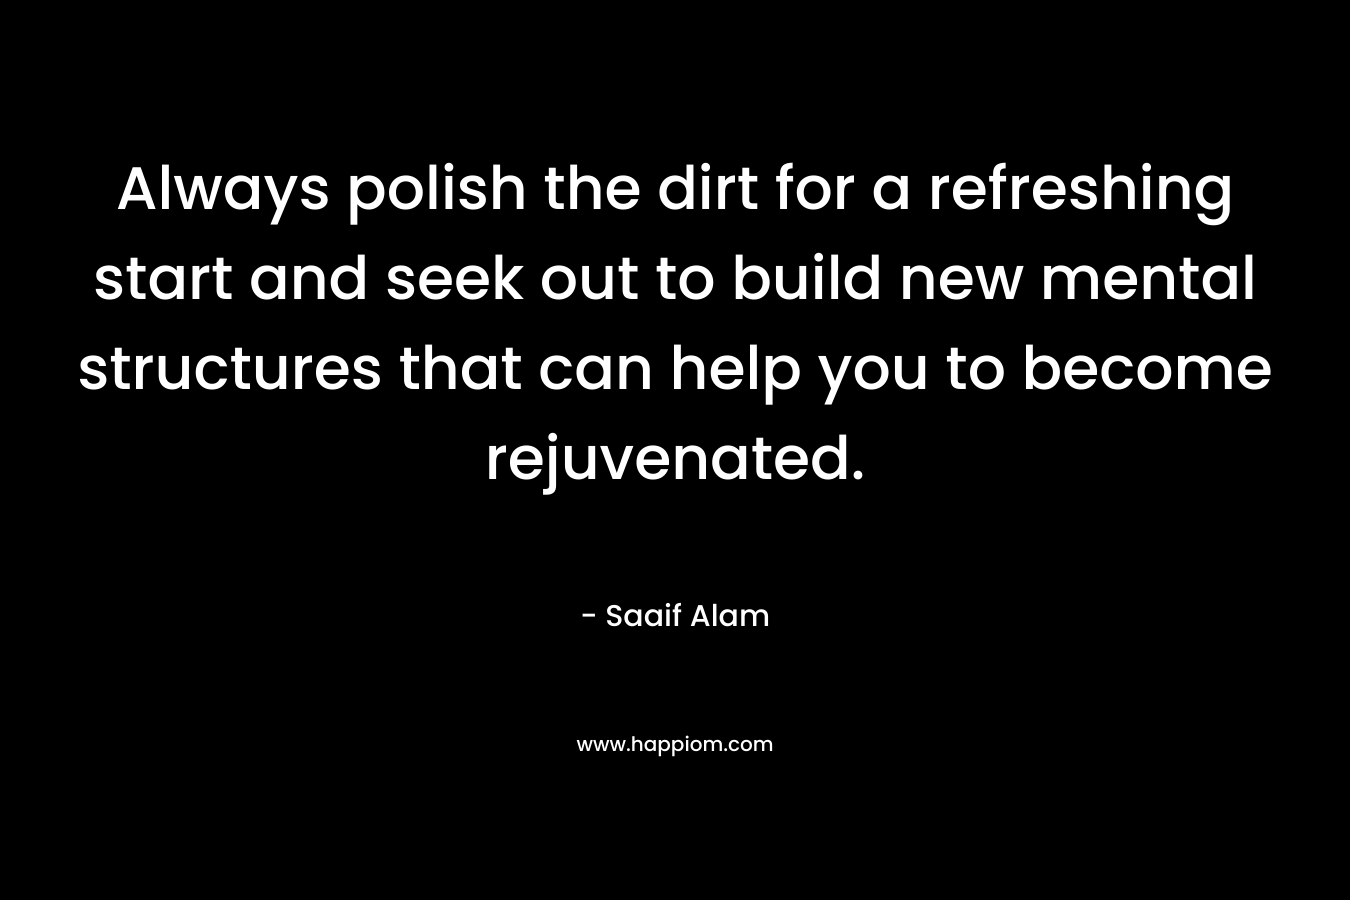 Always polish the dirt for a refreshing start and seek out to build new mental structures that can help you to become rejuvenated. – Saaif Alam